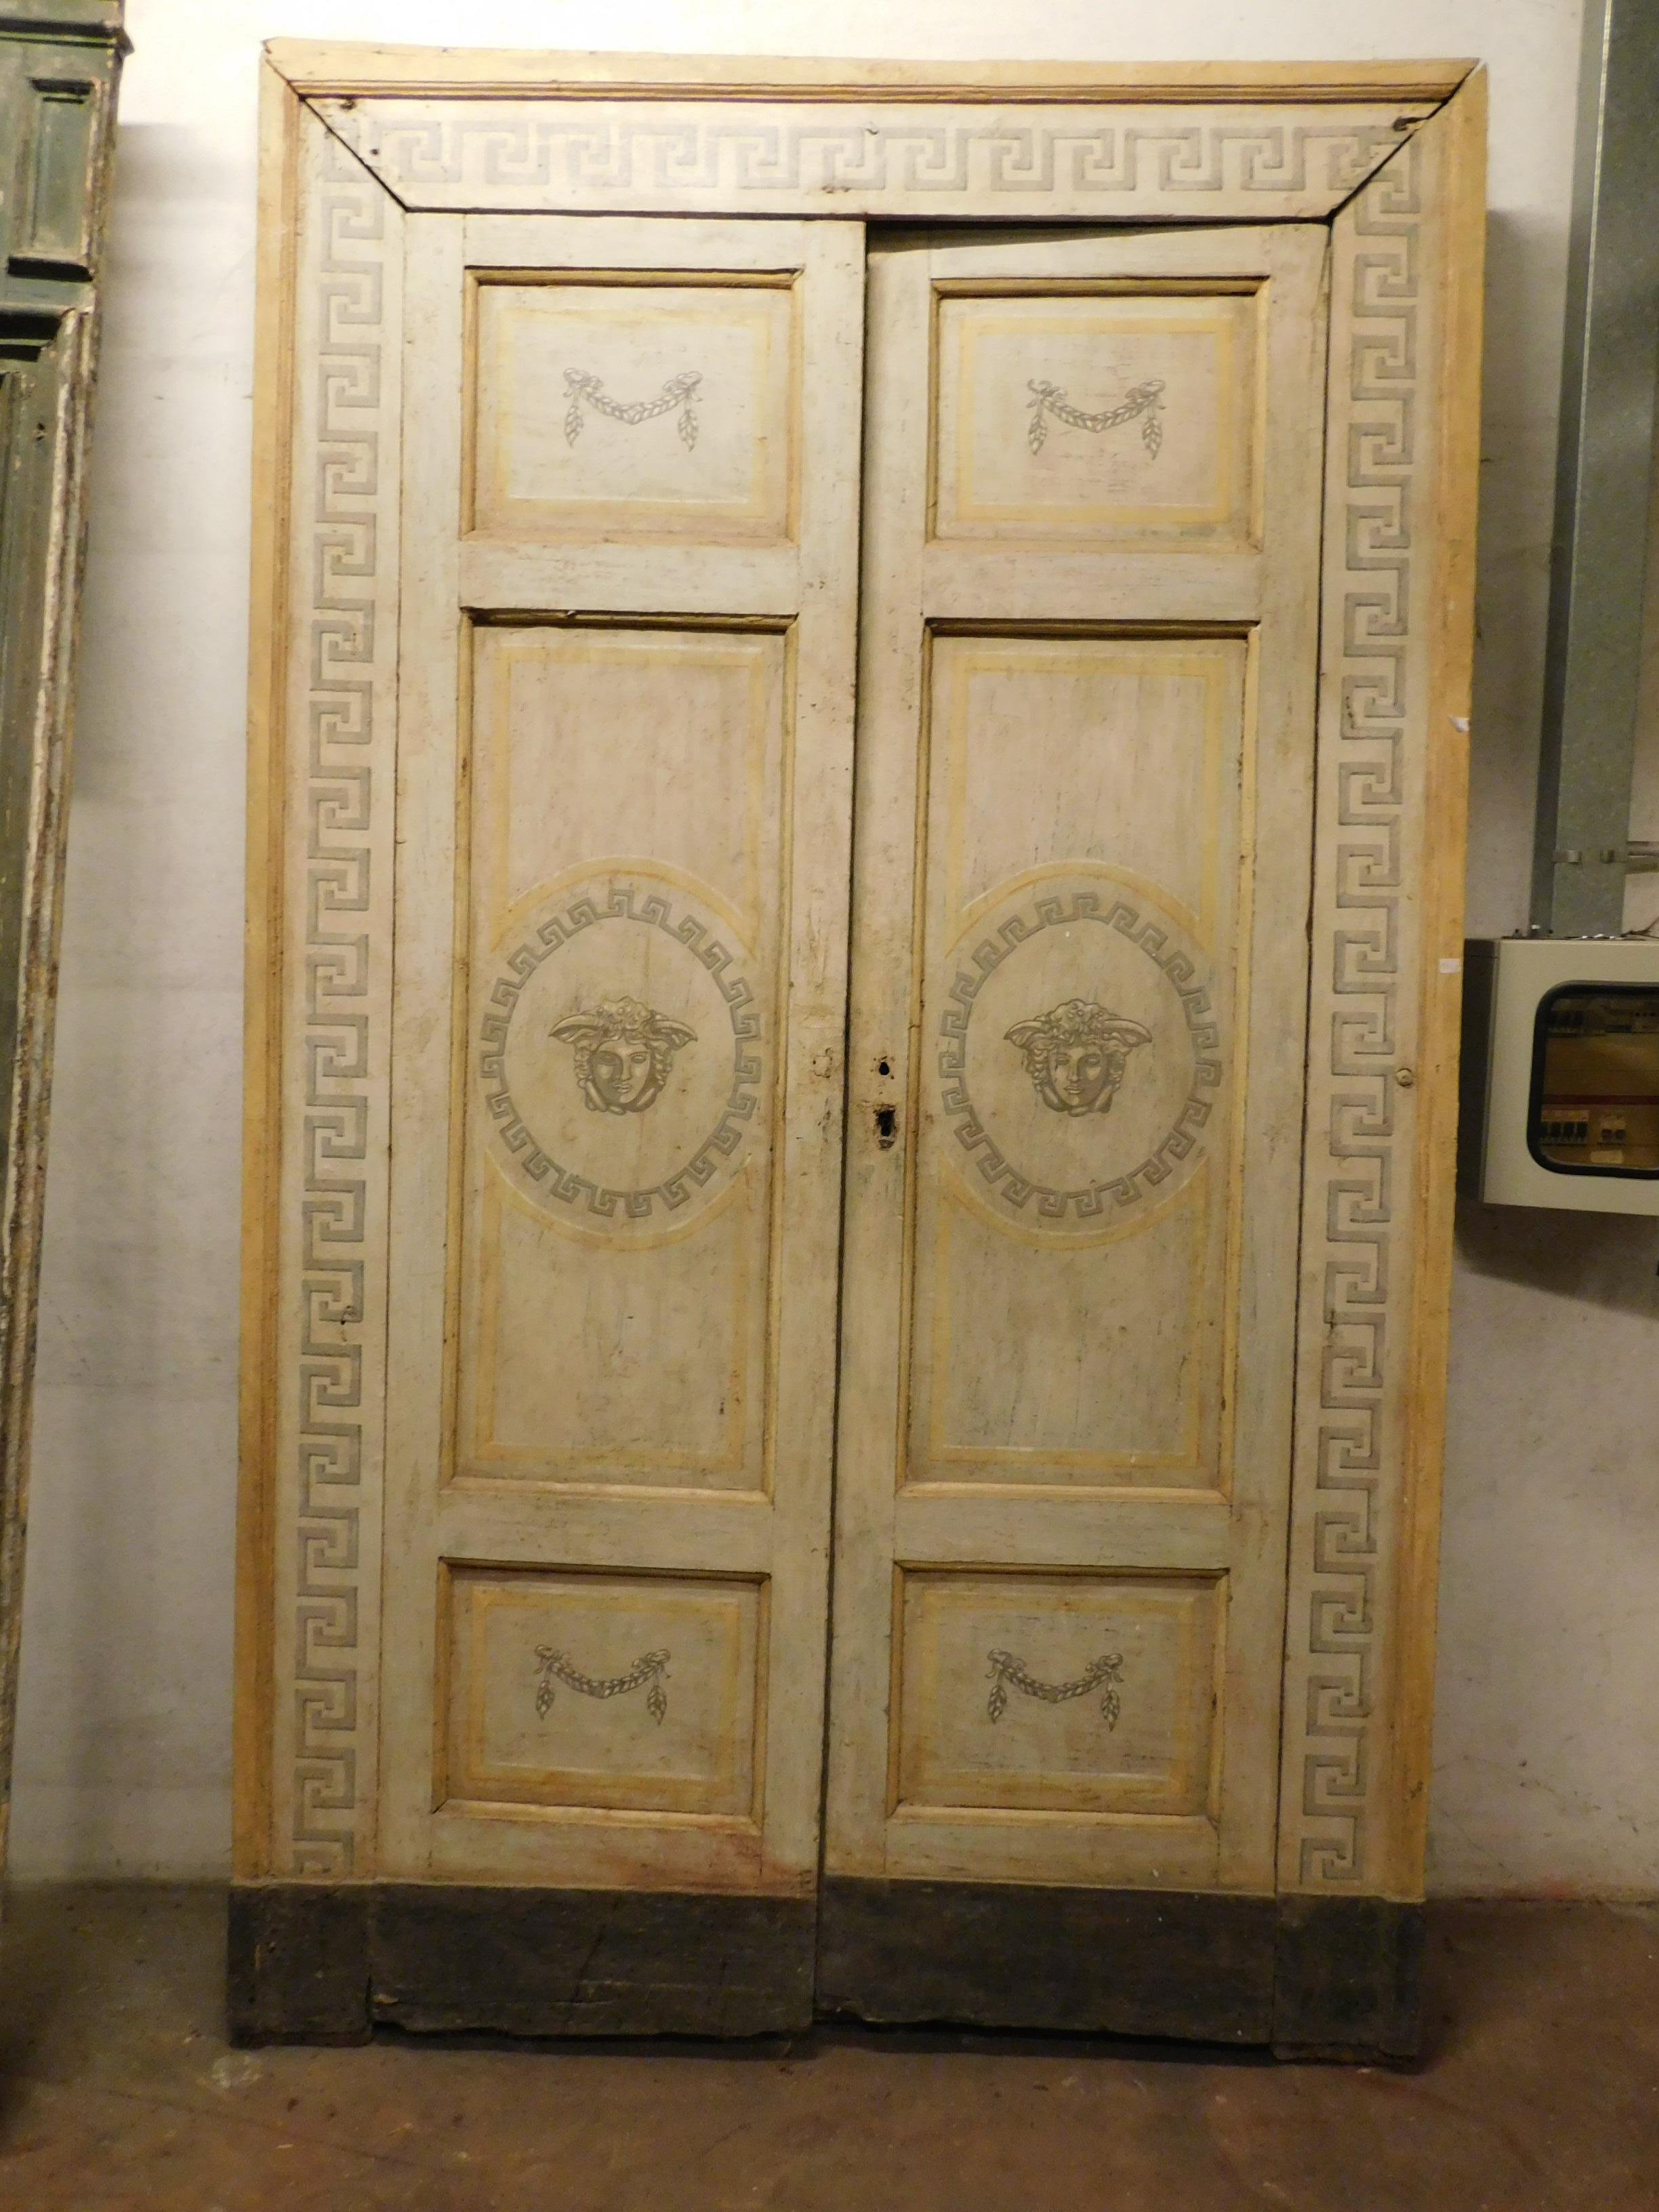 Pair of antique lacquered double doors, yellow, white and gray colors, hand painted with Greek, festoons and face of medusa, designed in full Louis XVI style, from southern Italy, beautiful in pairs, they are impressive in size and delightful for